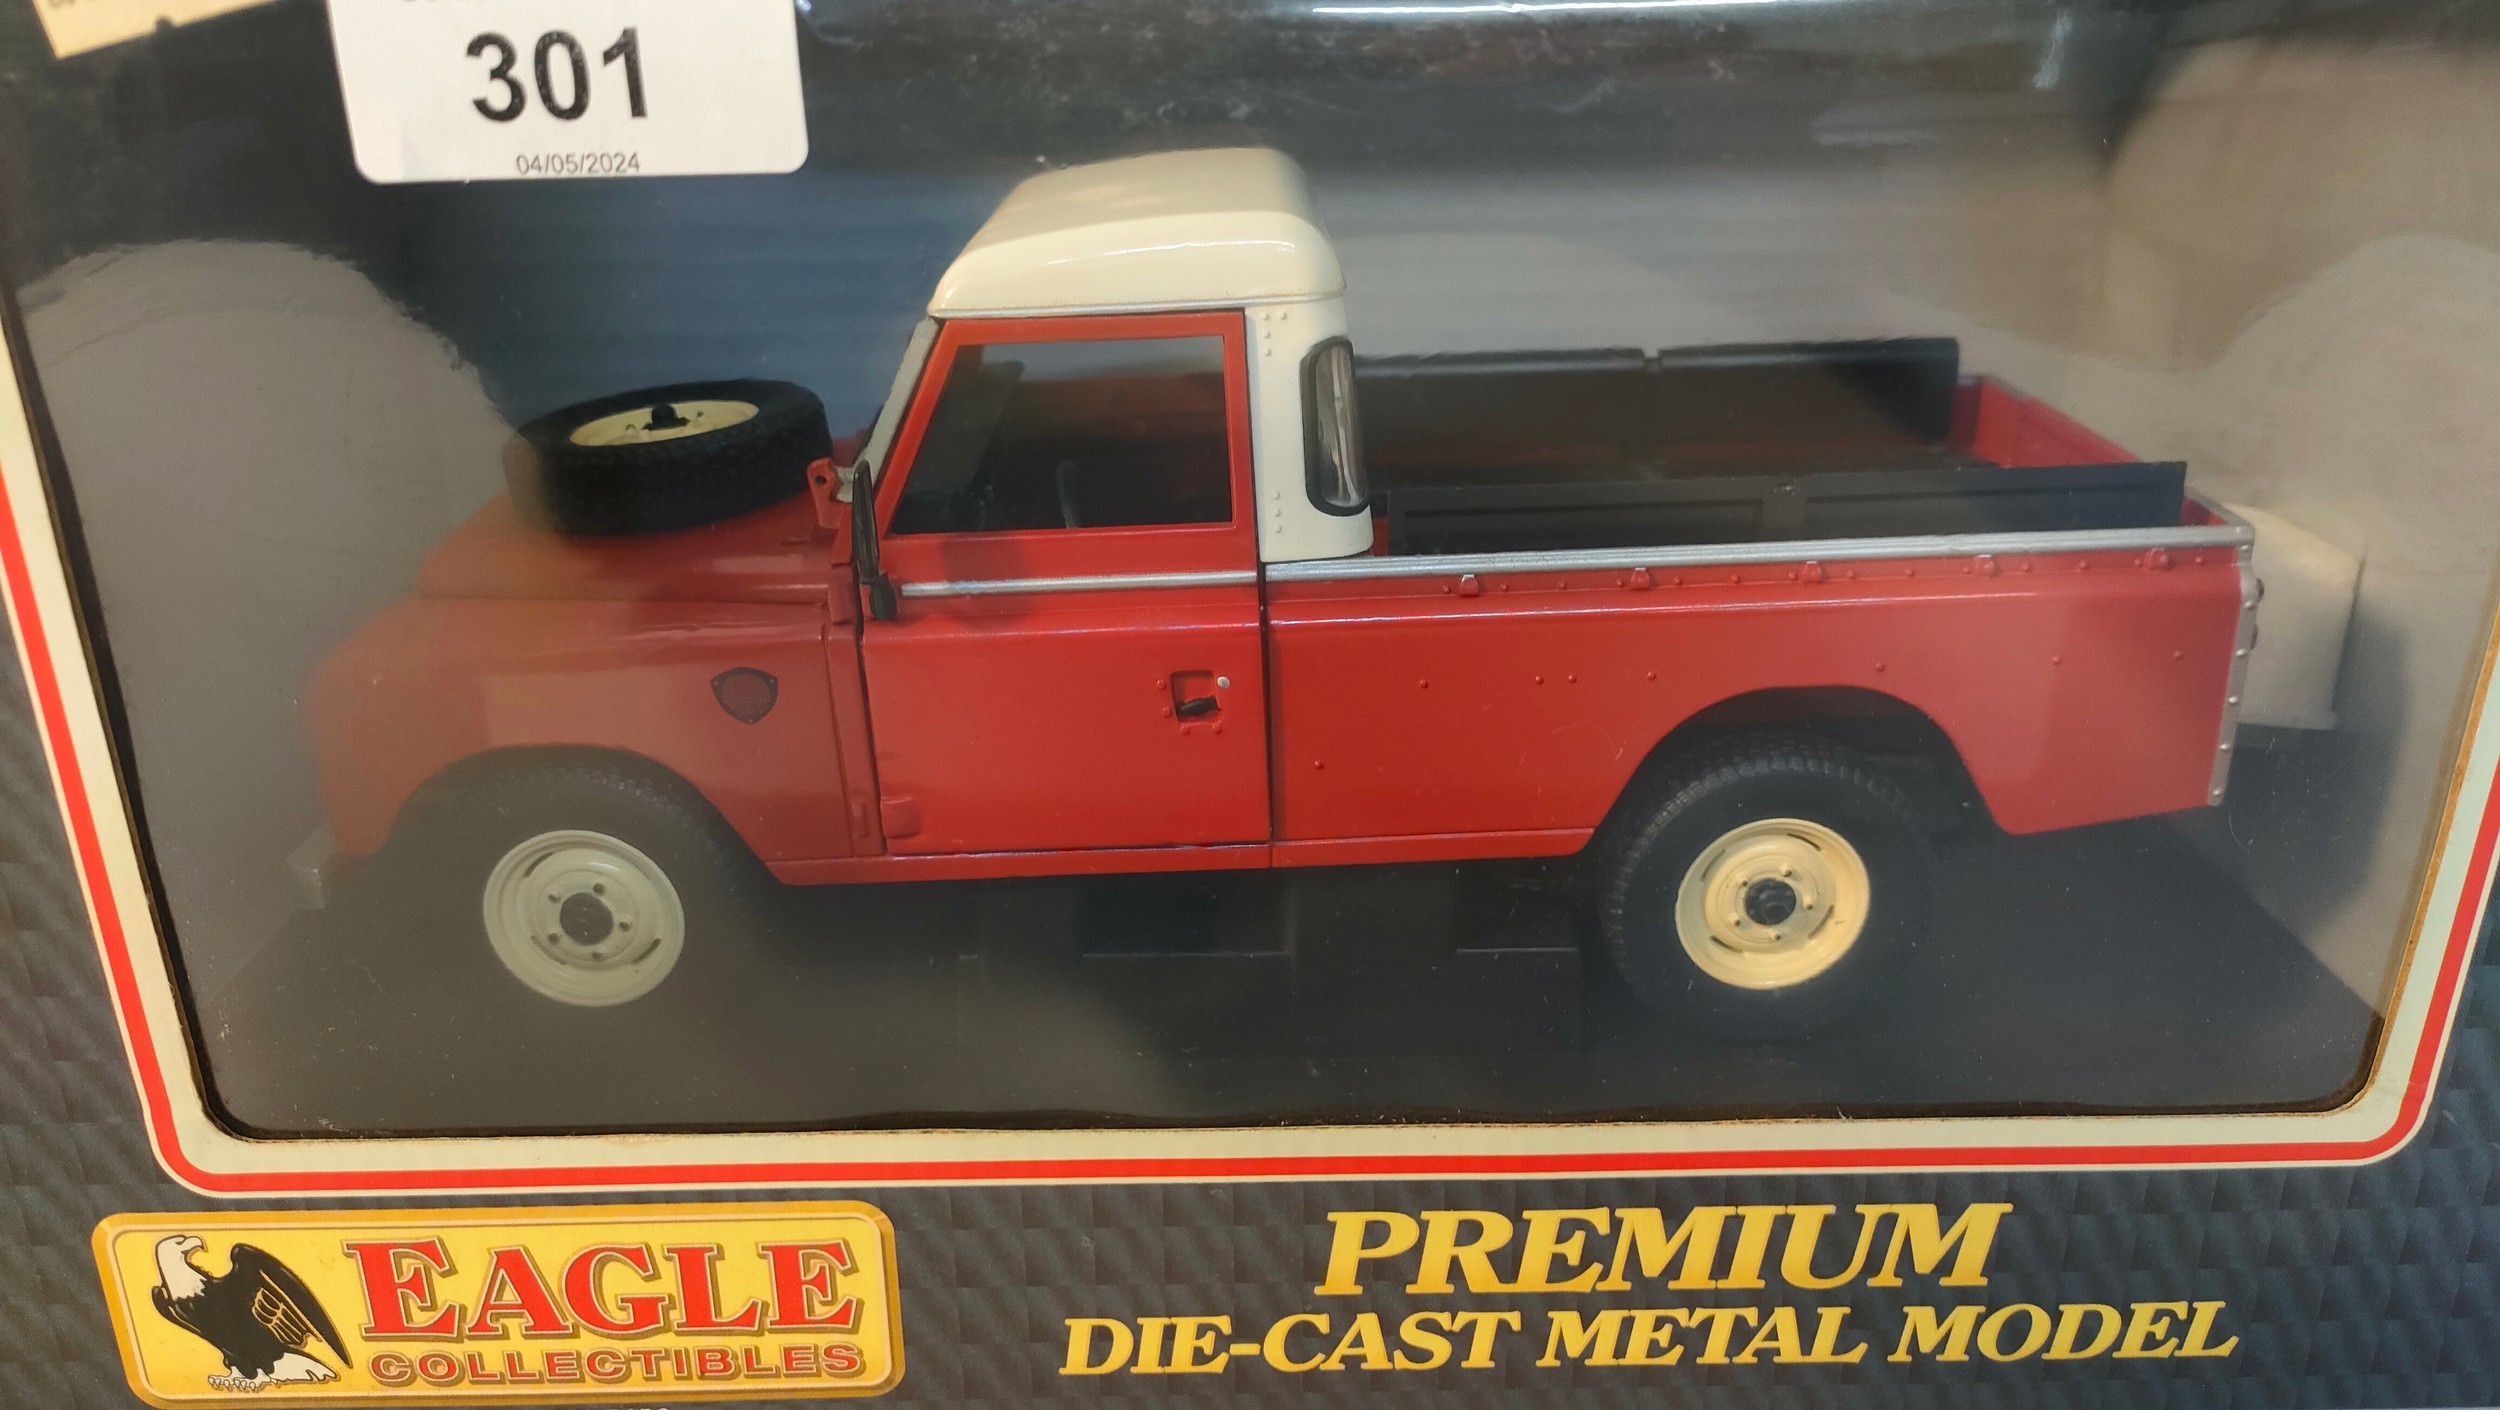 Eagles collectibles die cast farm jeep along with Hummer 1:18 scale model - Image 3 of 3